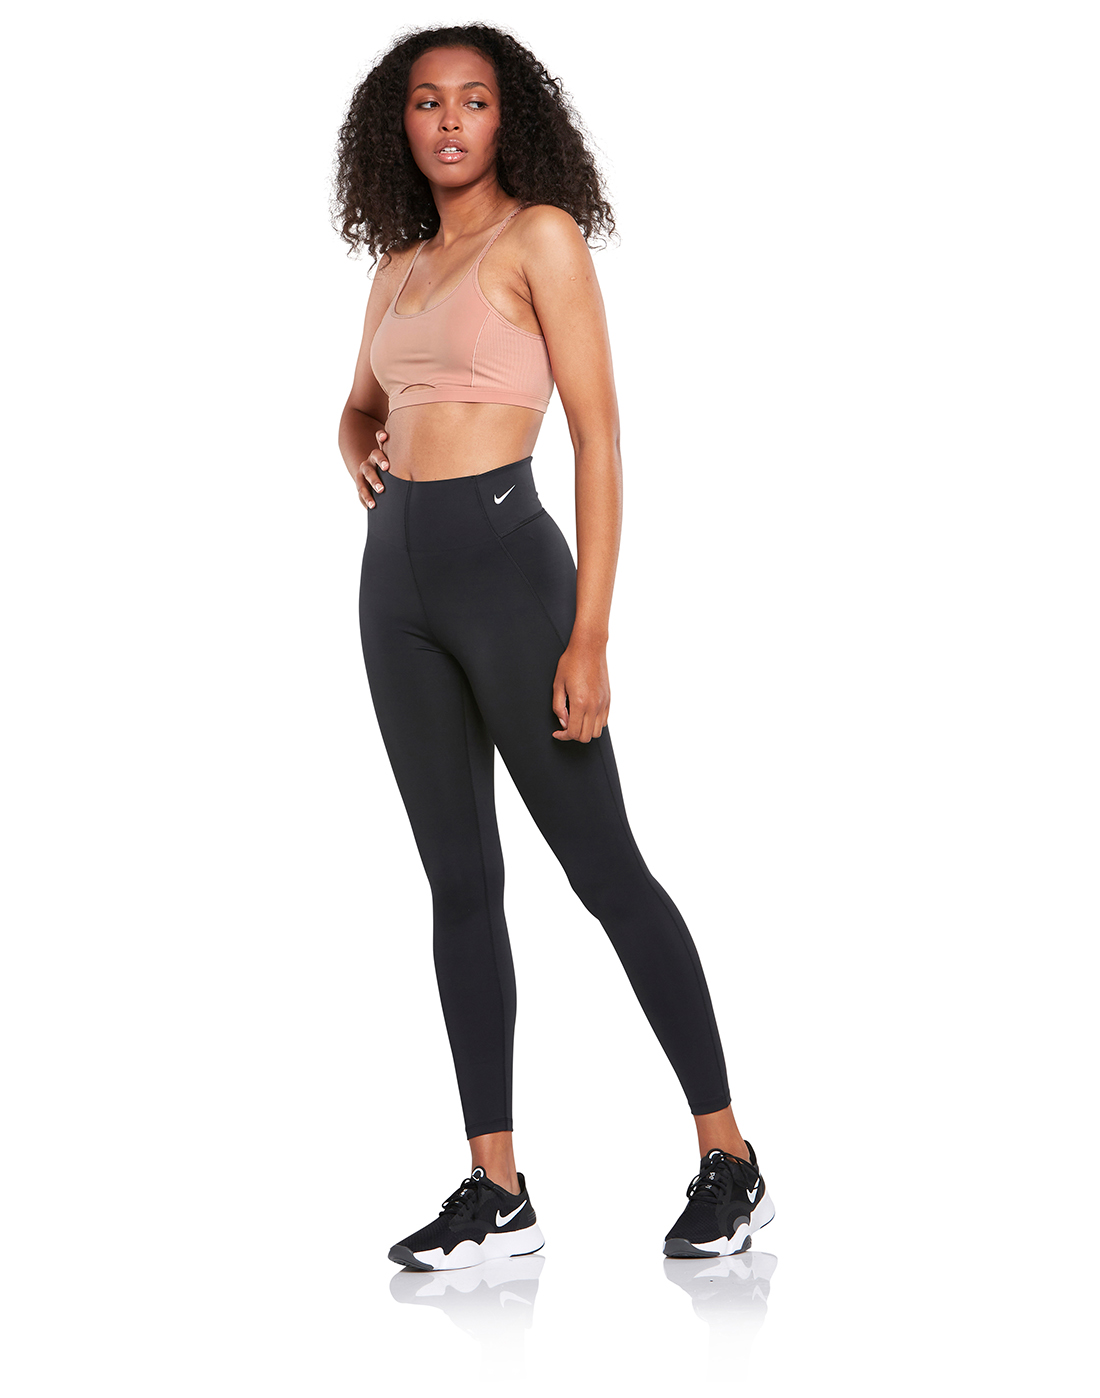 Women's Black Nike Sculpt Victory Tights | Life Style Sports